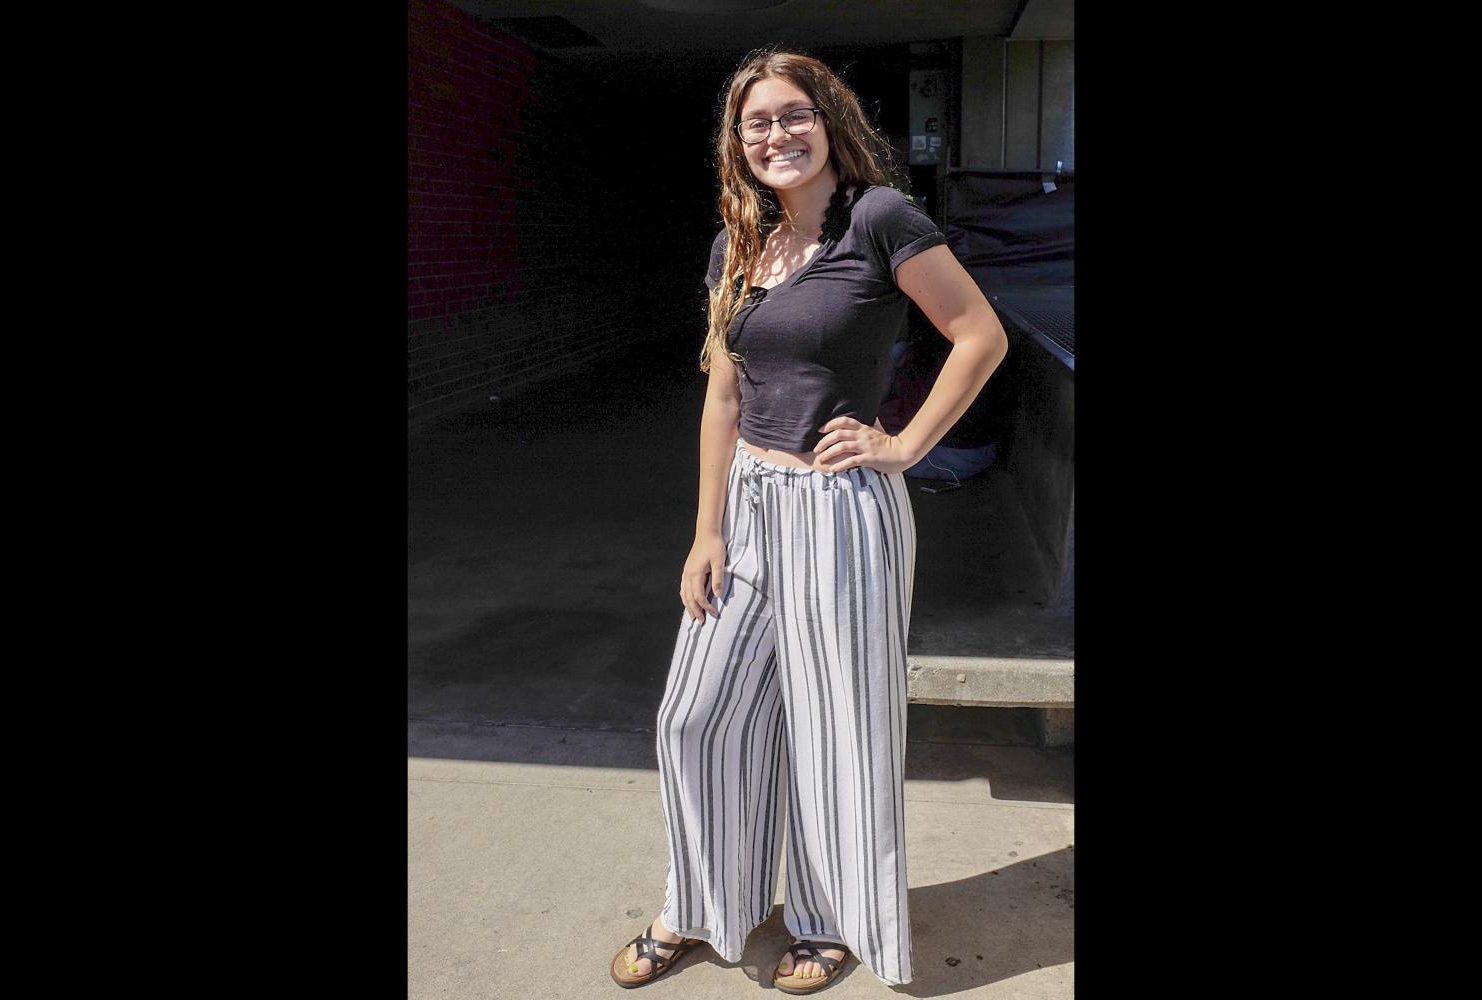 Geography major, Madison Rosen wears loose fitting striped slacks and a black crop top with open toed sandals on Aug. 29. “These look like pajamas honestly but they’re cute and comfy… My mom likes to think I dress bohemian kind of, kind of hippie,” Rosen said. (Photo by Patrick Hyun Wilson)